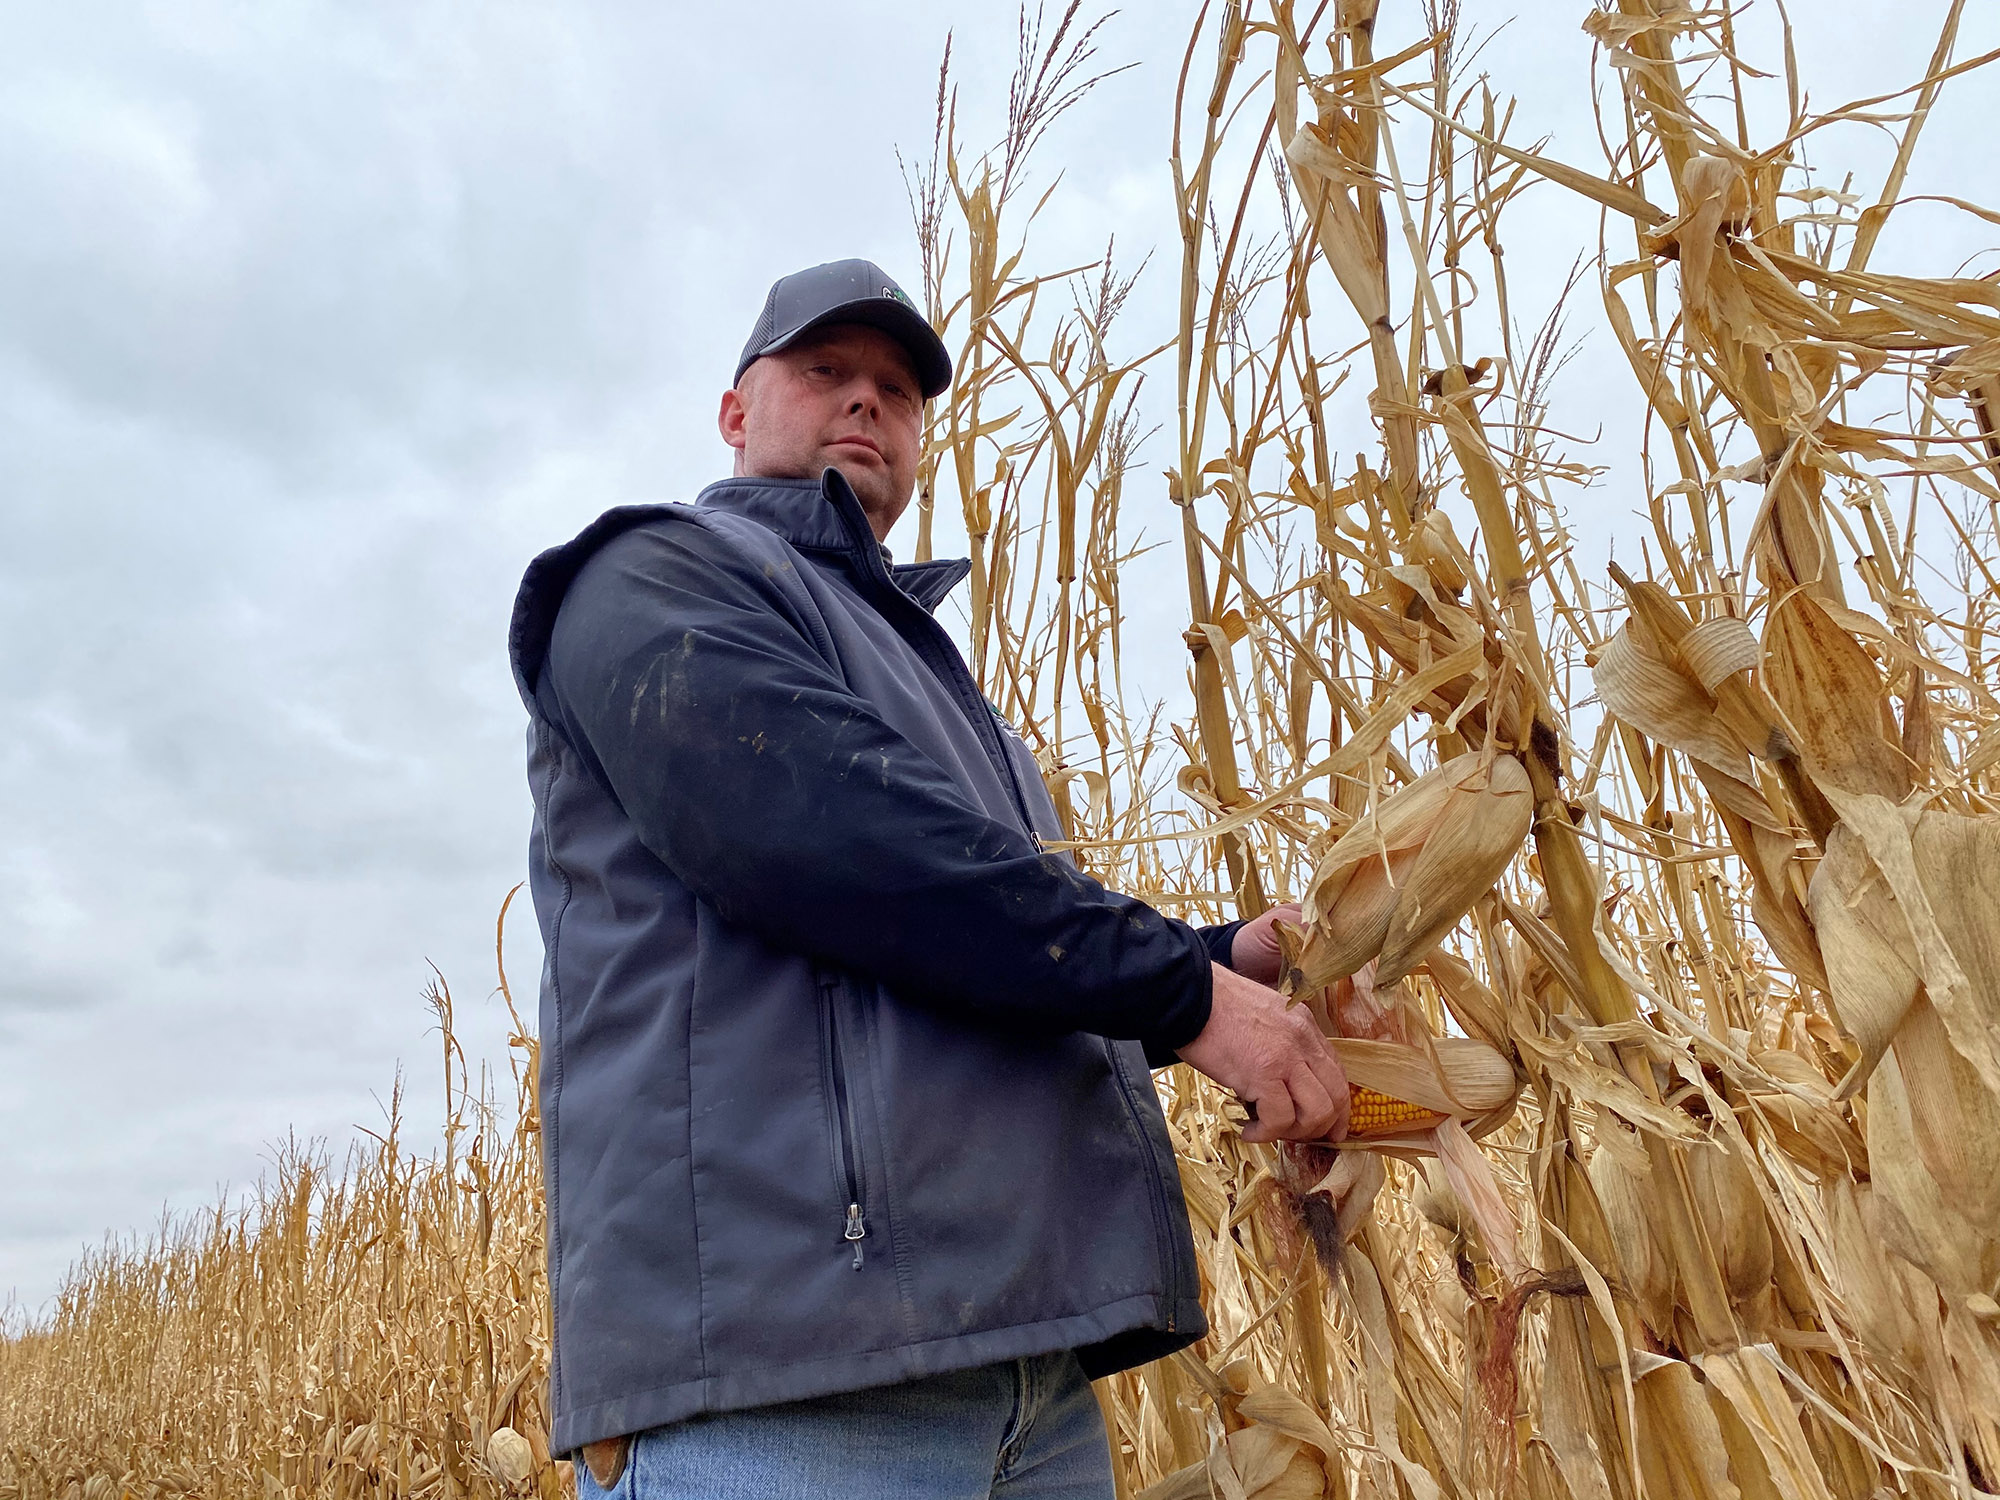 Iowa Farmer Finds Fortune in Selling Carbon Credits to Shopify - Bloomberg